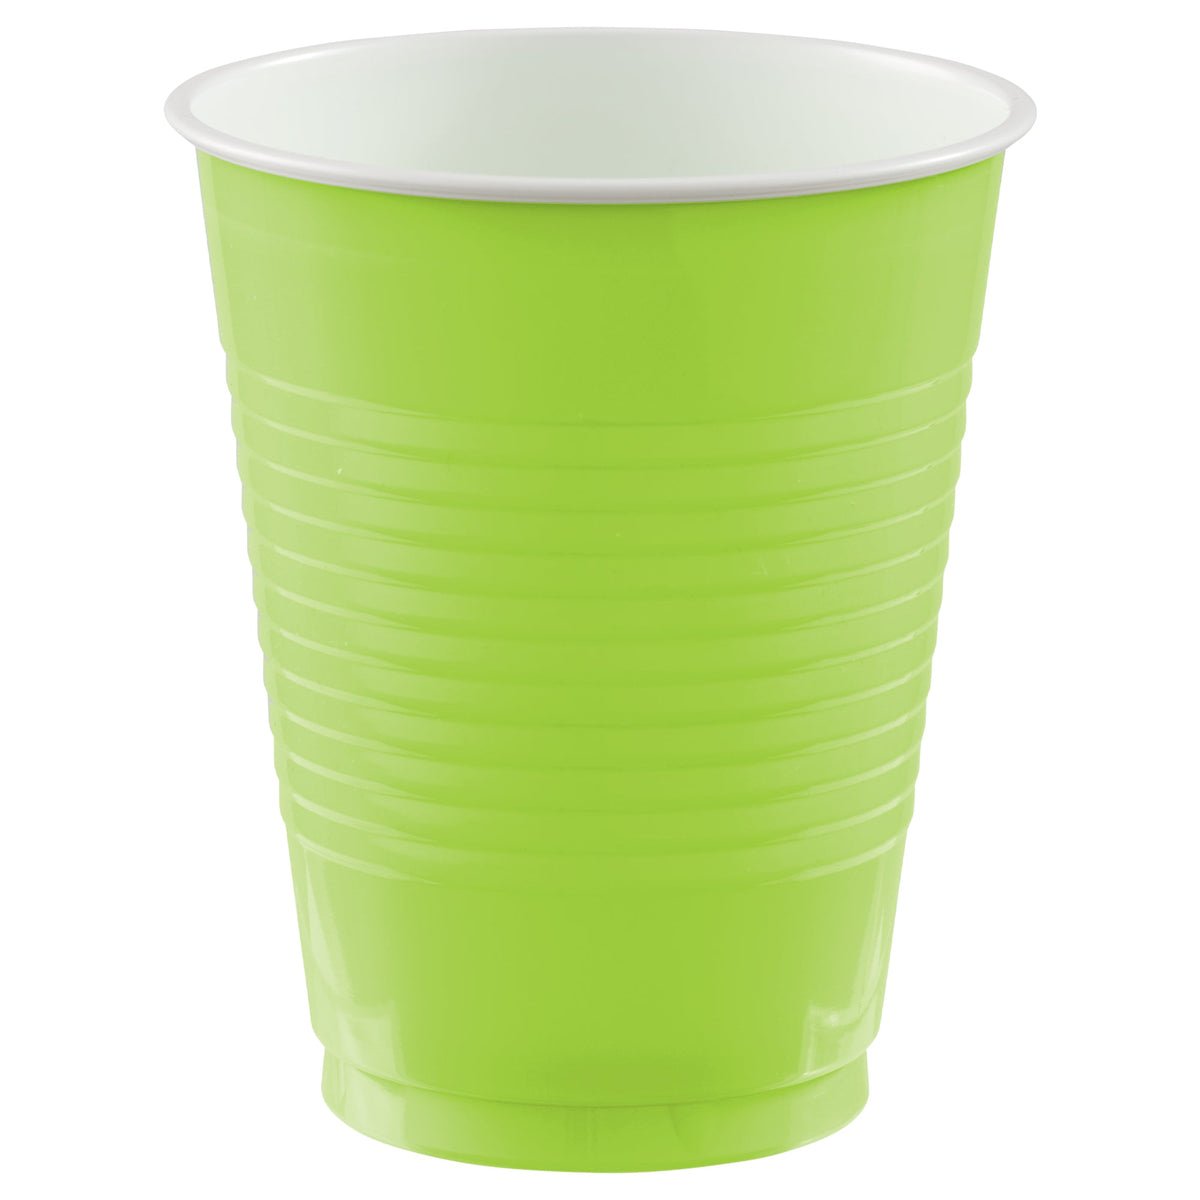 Kiwi 18 oz. Plastic Cups Package of 50